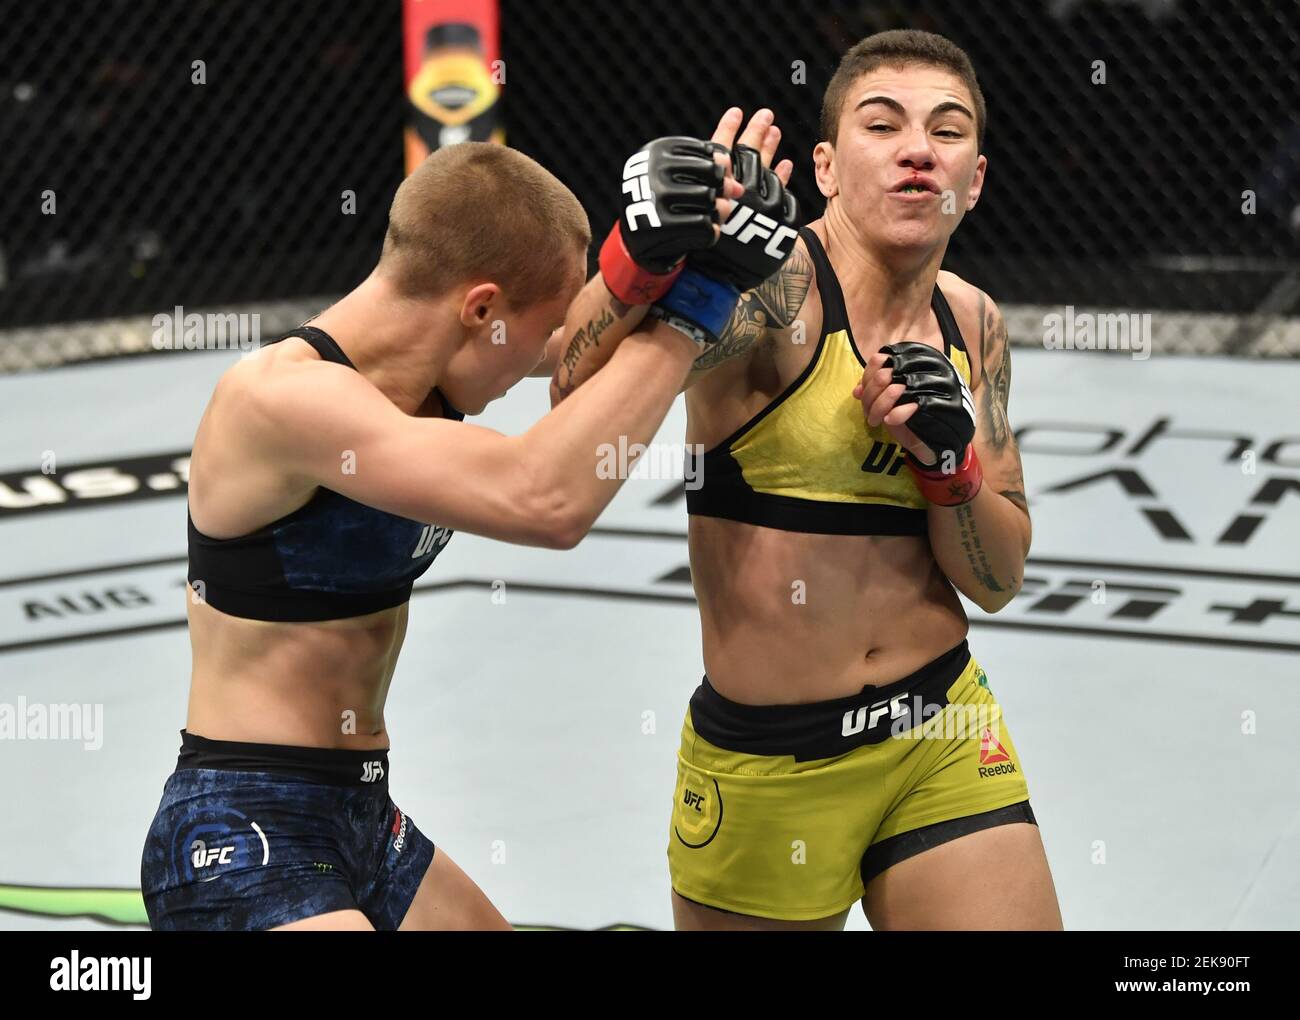 July 12 Abu Dhabi Uae Jessica Andrade Of Brazil Punches Rose Namajunas In Their Strawweight Fight During The Ufc 251 Event At Flash Forum On Ufc Fight Island On July 12